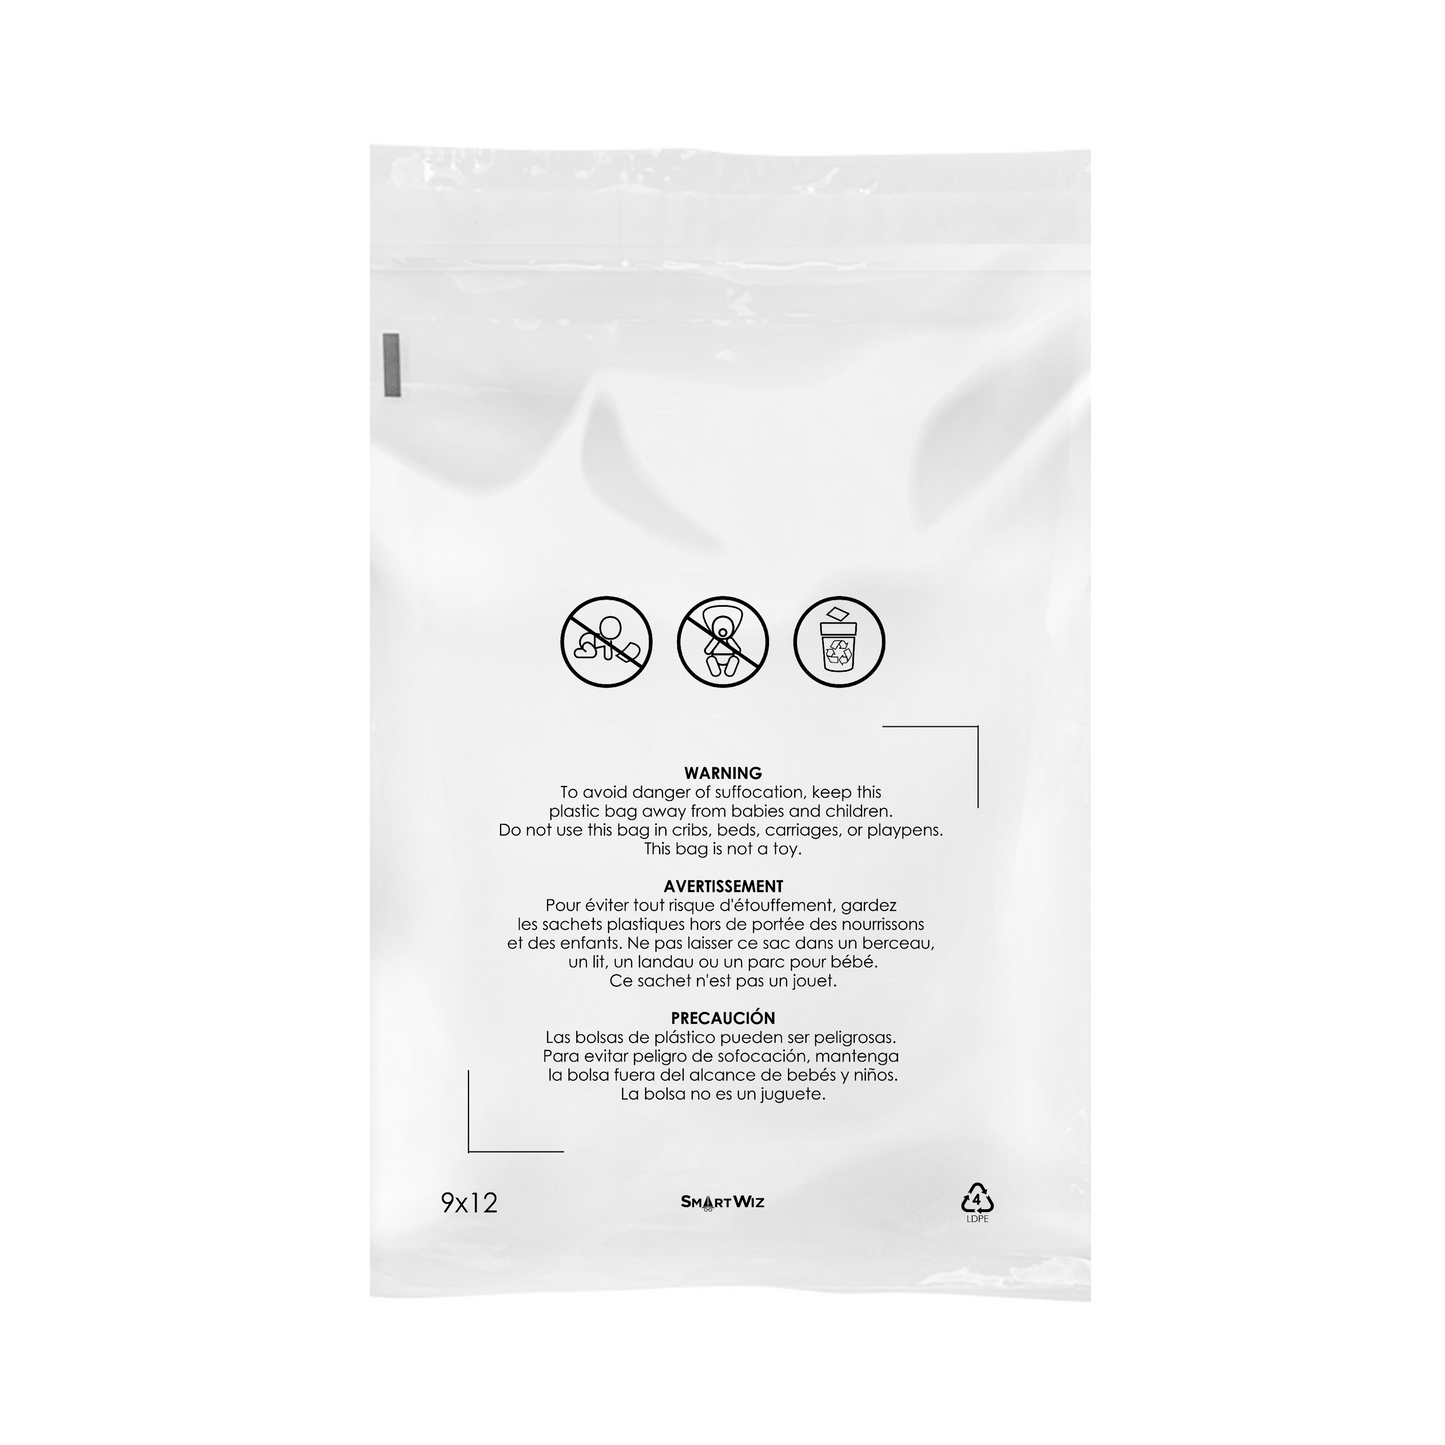 SmartWiz 1000 Poly Bags - Clear Poly Bags, with Suffocation Warning, Permanent Self Seal, Thick Plastic, for Shipping, Packaging and Mailing Merchandise, Apparel, Single Size